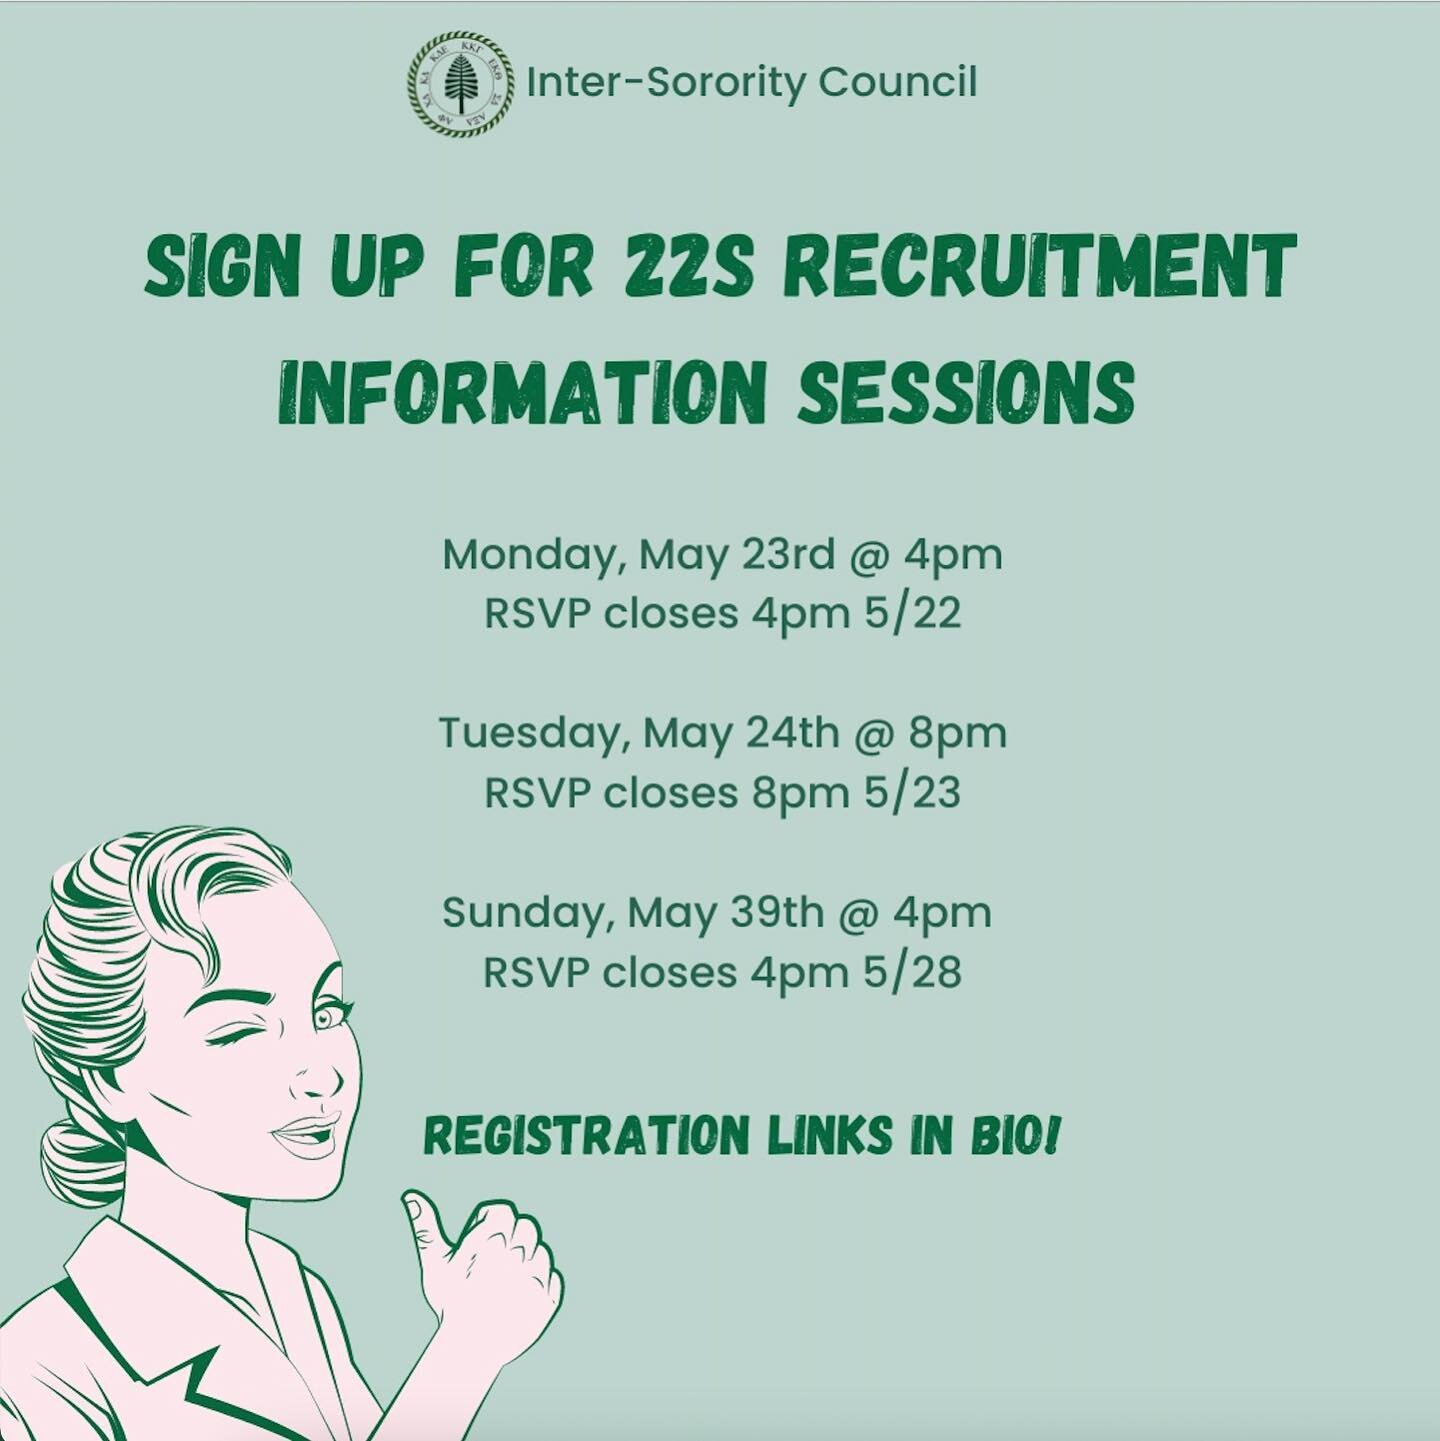 Sign up for 22S Recruitment Information Sessions! 

Registration will close 24 HOURS before each session. Links to RSVP in bio!

Attendance at spring pre-recruitment sessions is optional. There will be a required fall session if you wish to participa